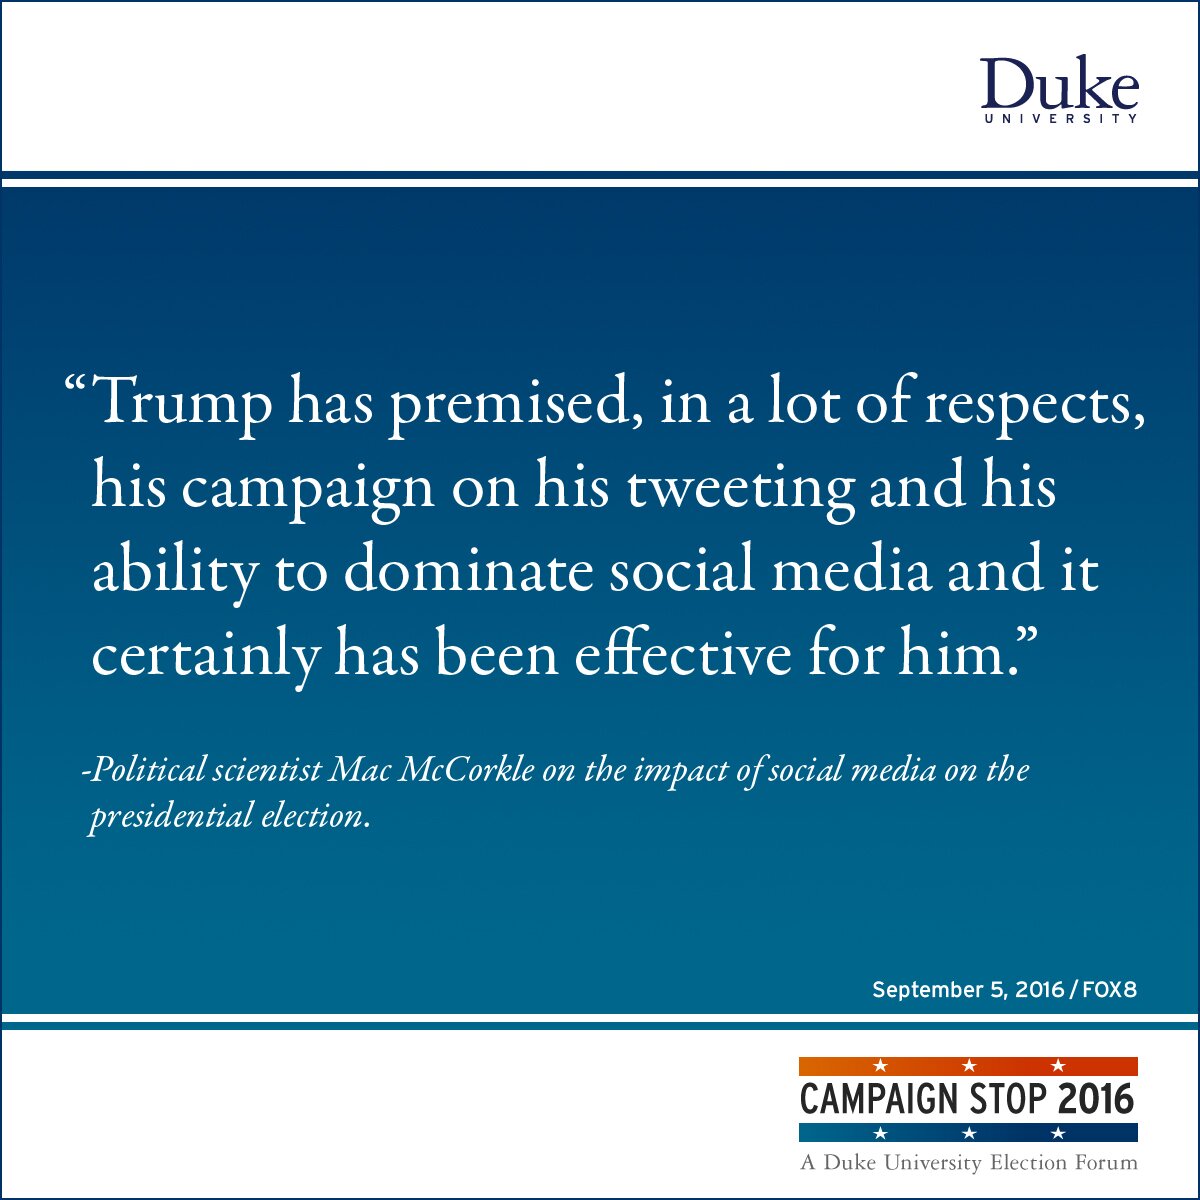 “Trump has premised, in a lot of respects, his campaign on his tweeting and his ability to dominate social media and it certainly has been effective for him.” -Political scientist Mac McCorkle on the impact of social media on the presidential election.